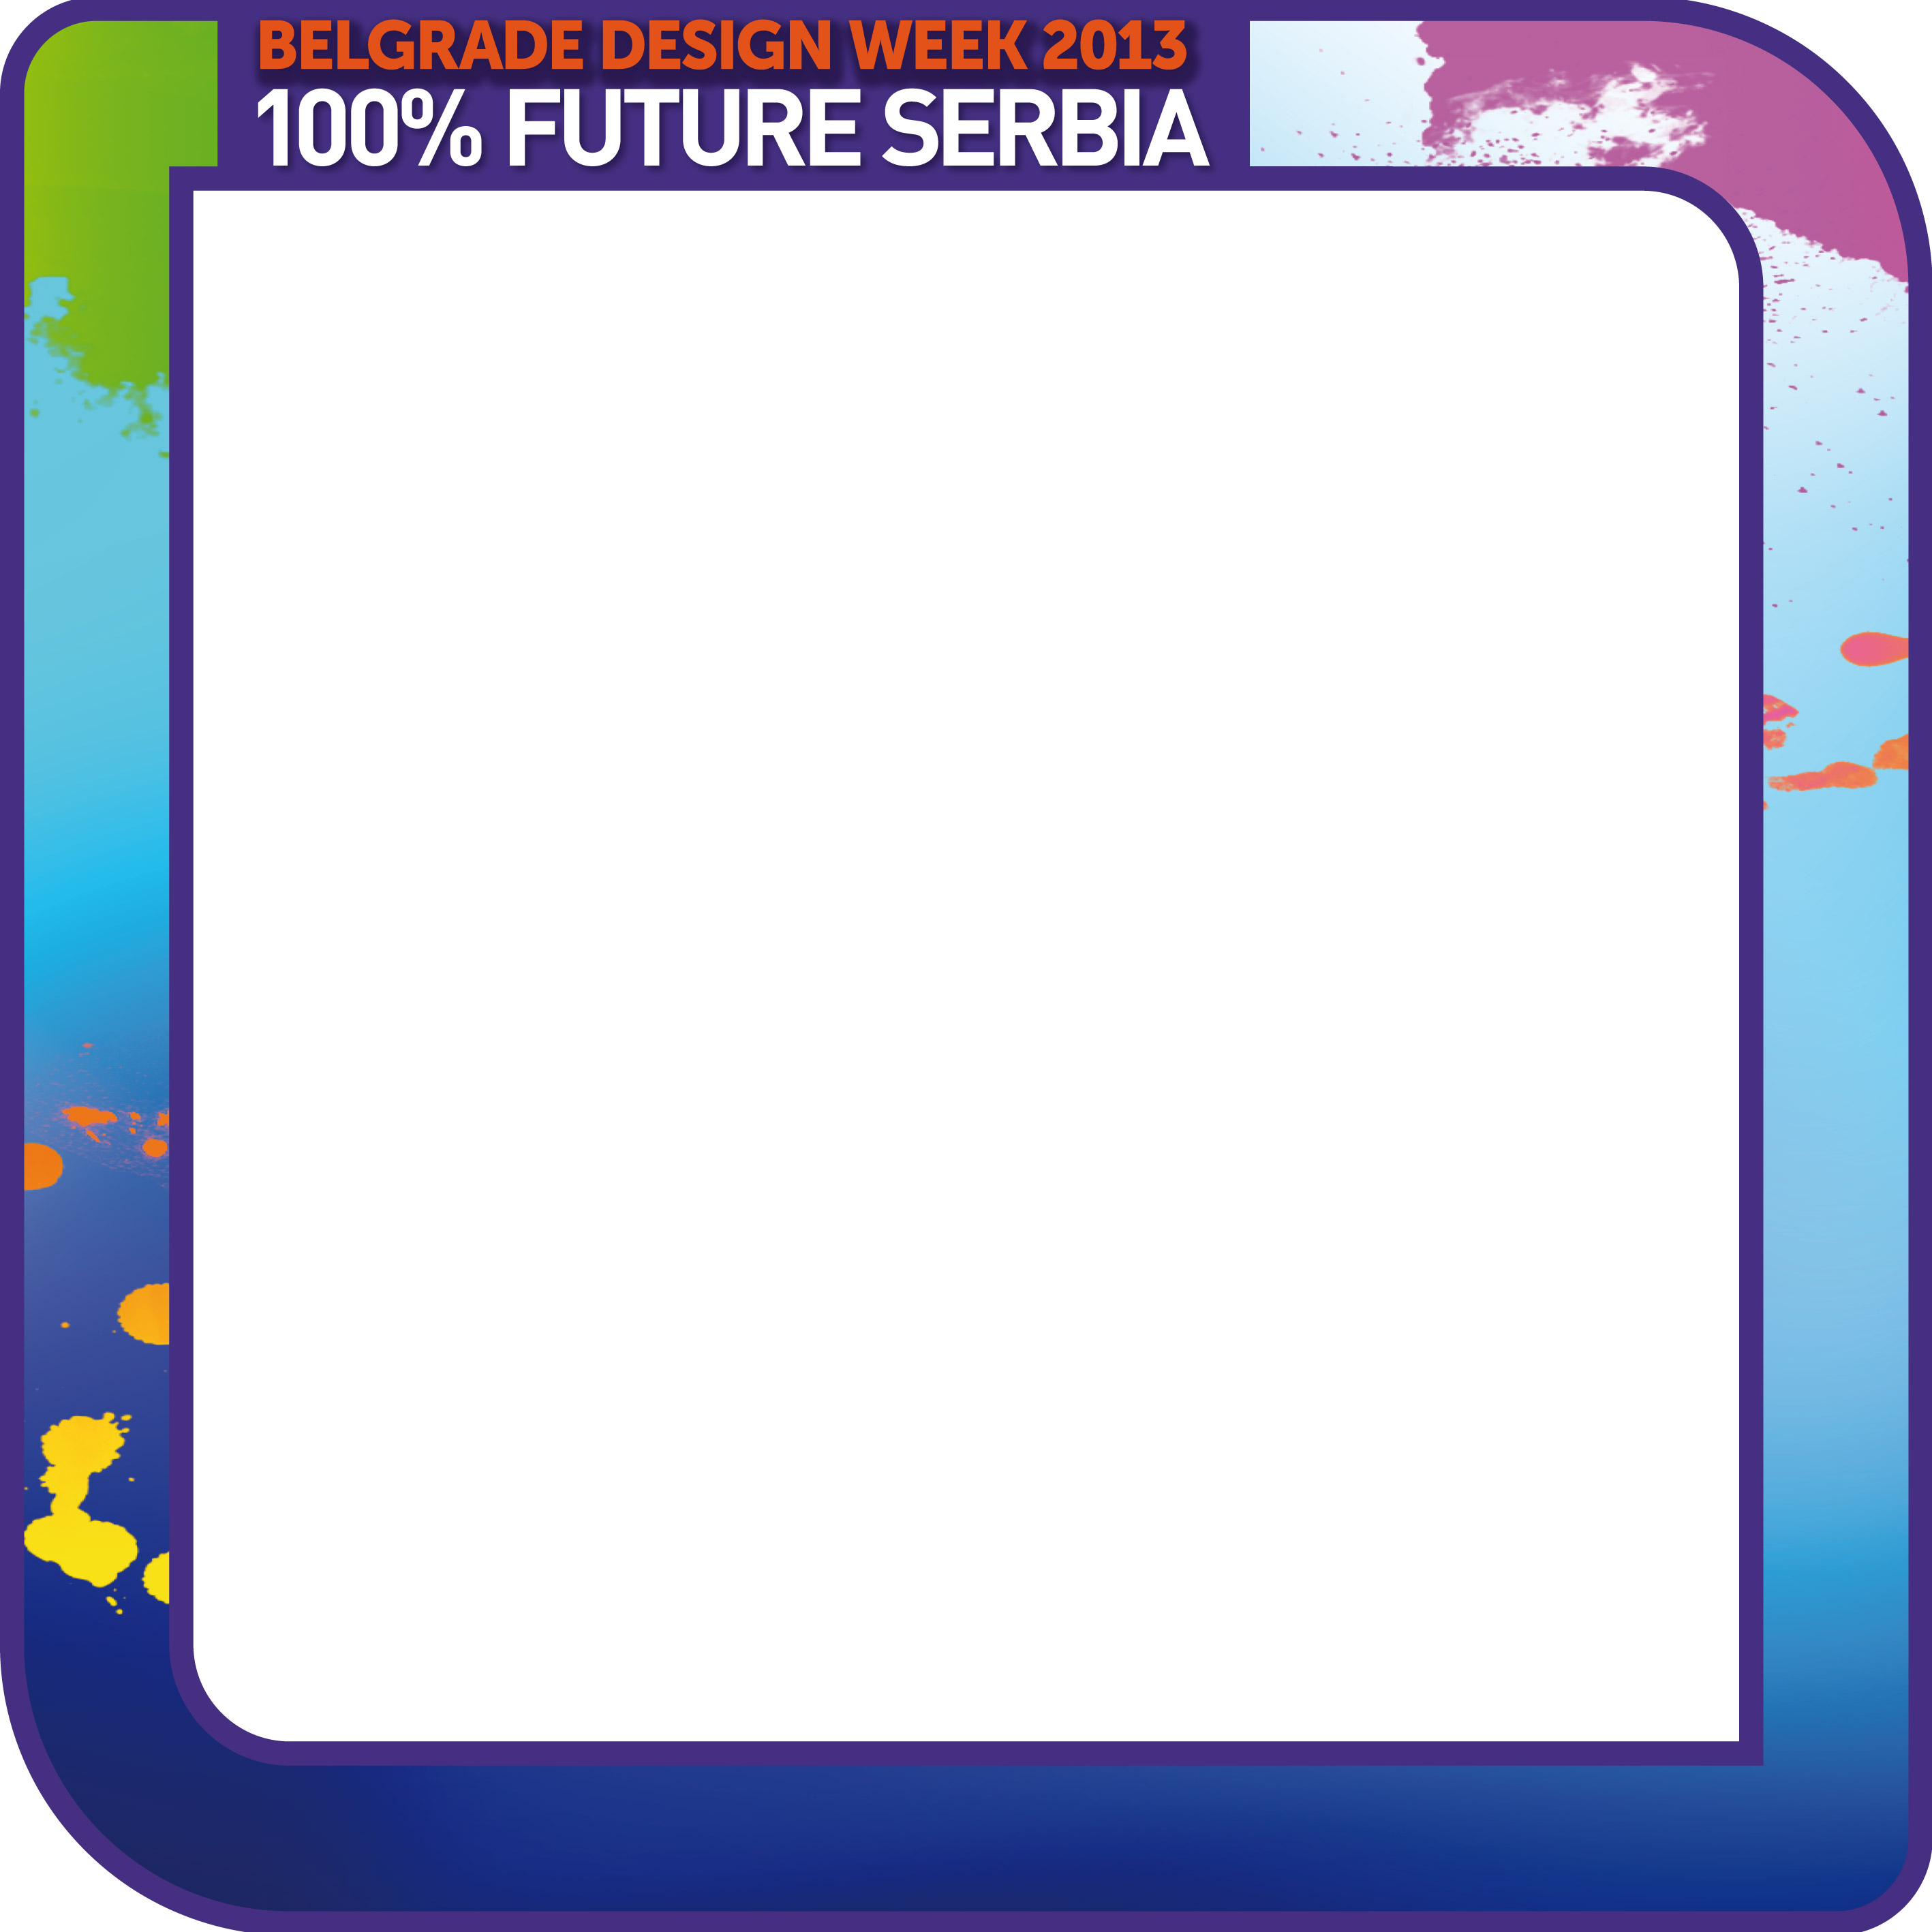 FUTURE SERBIA PROJECT AS AN OPPORTUNITY FOR YOUNG DESIGNERS